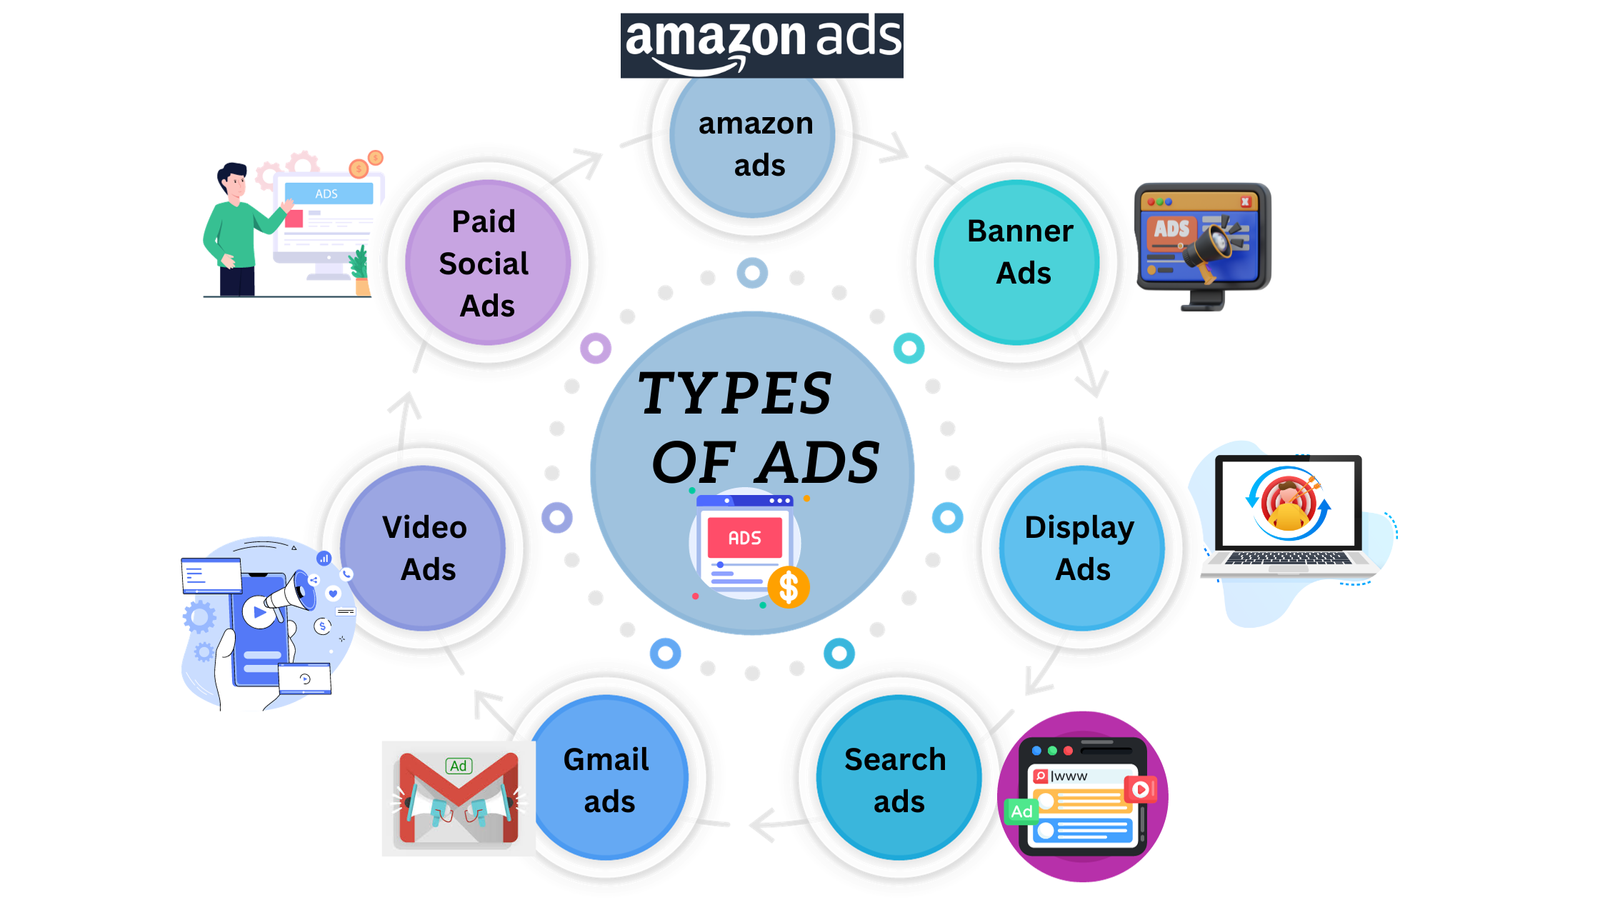 Types of ads